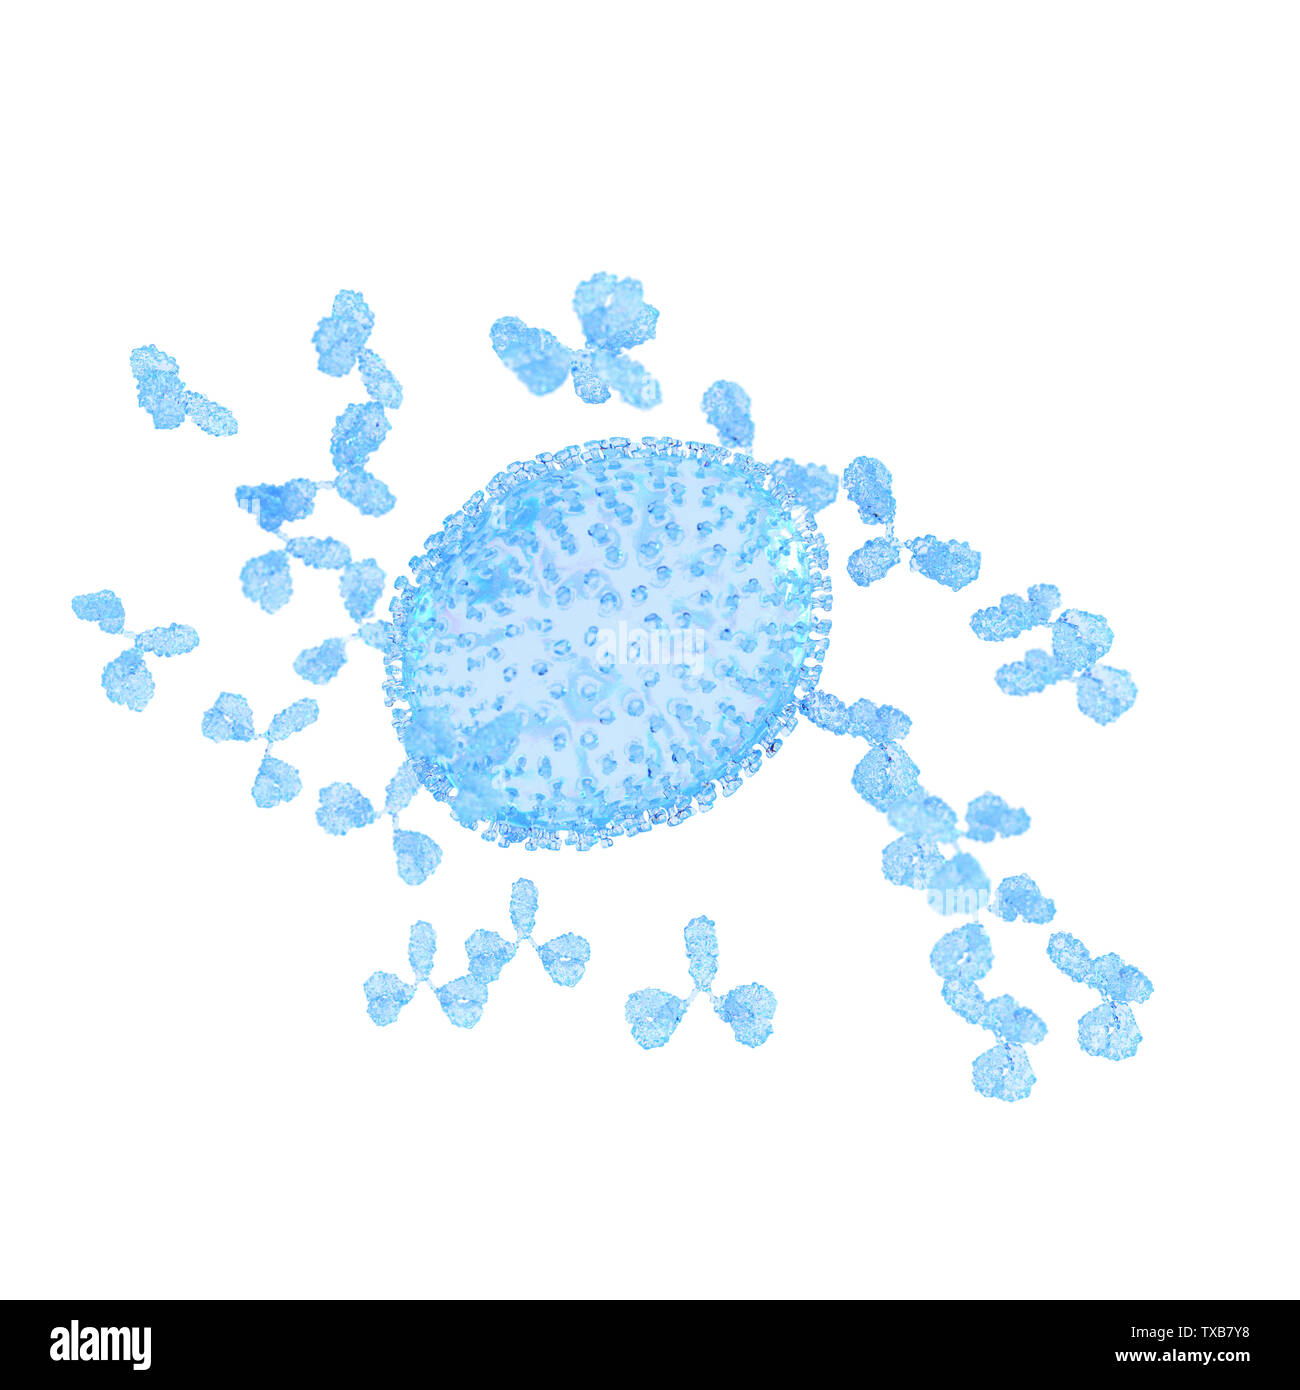 3d rendered illustration of an influenza virus being attacked by antibodies Stock Photo